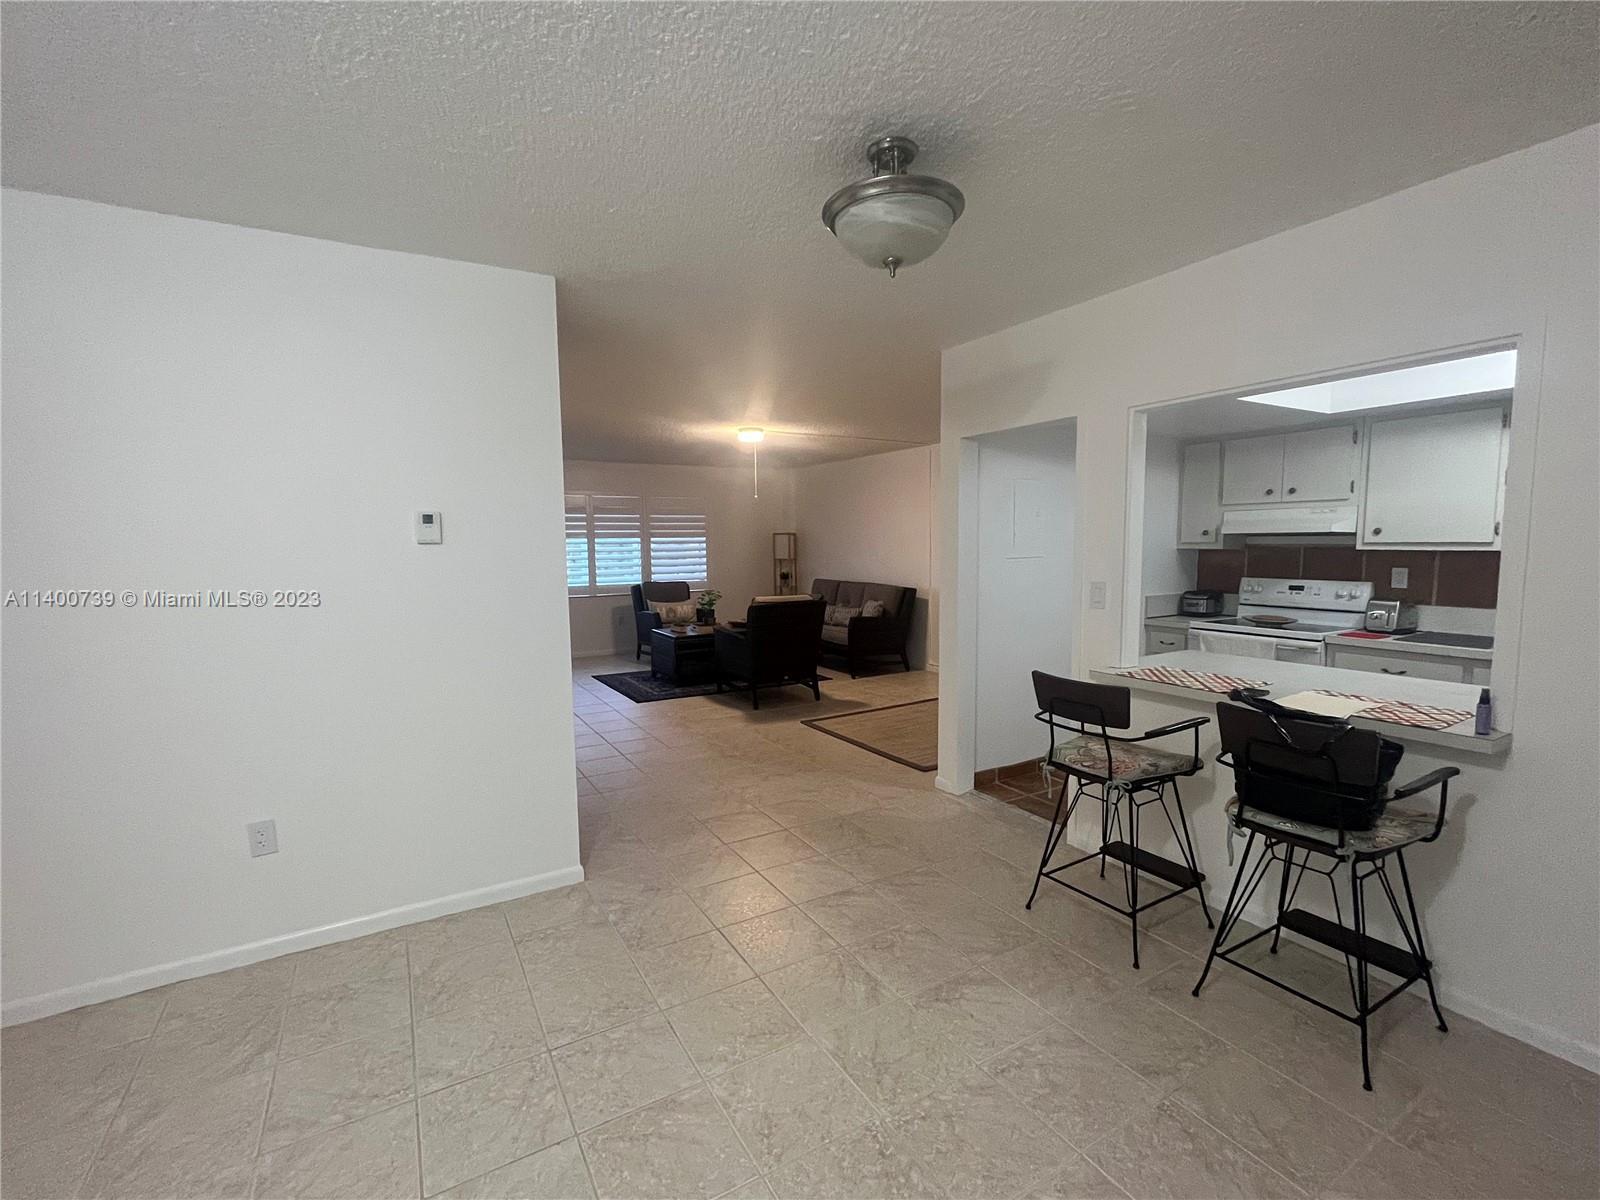 Very Spacious 2 bedroom at the shores condo. Rental restrictions apply. New seawall. Please see brok